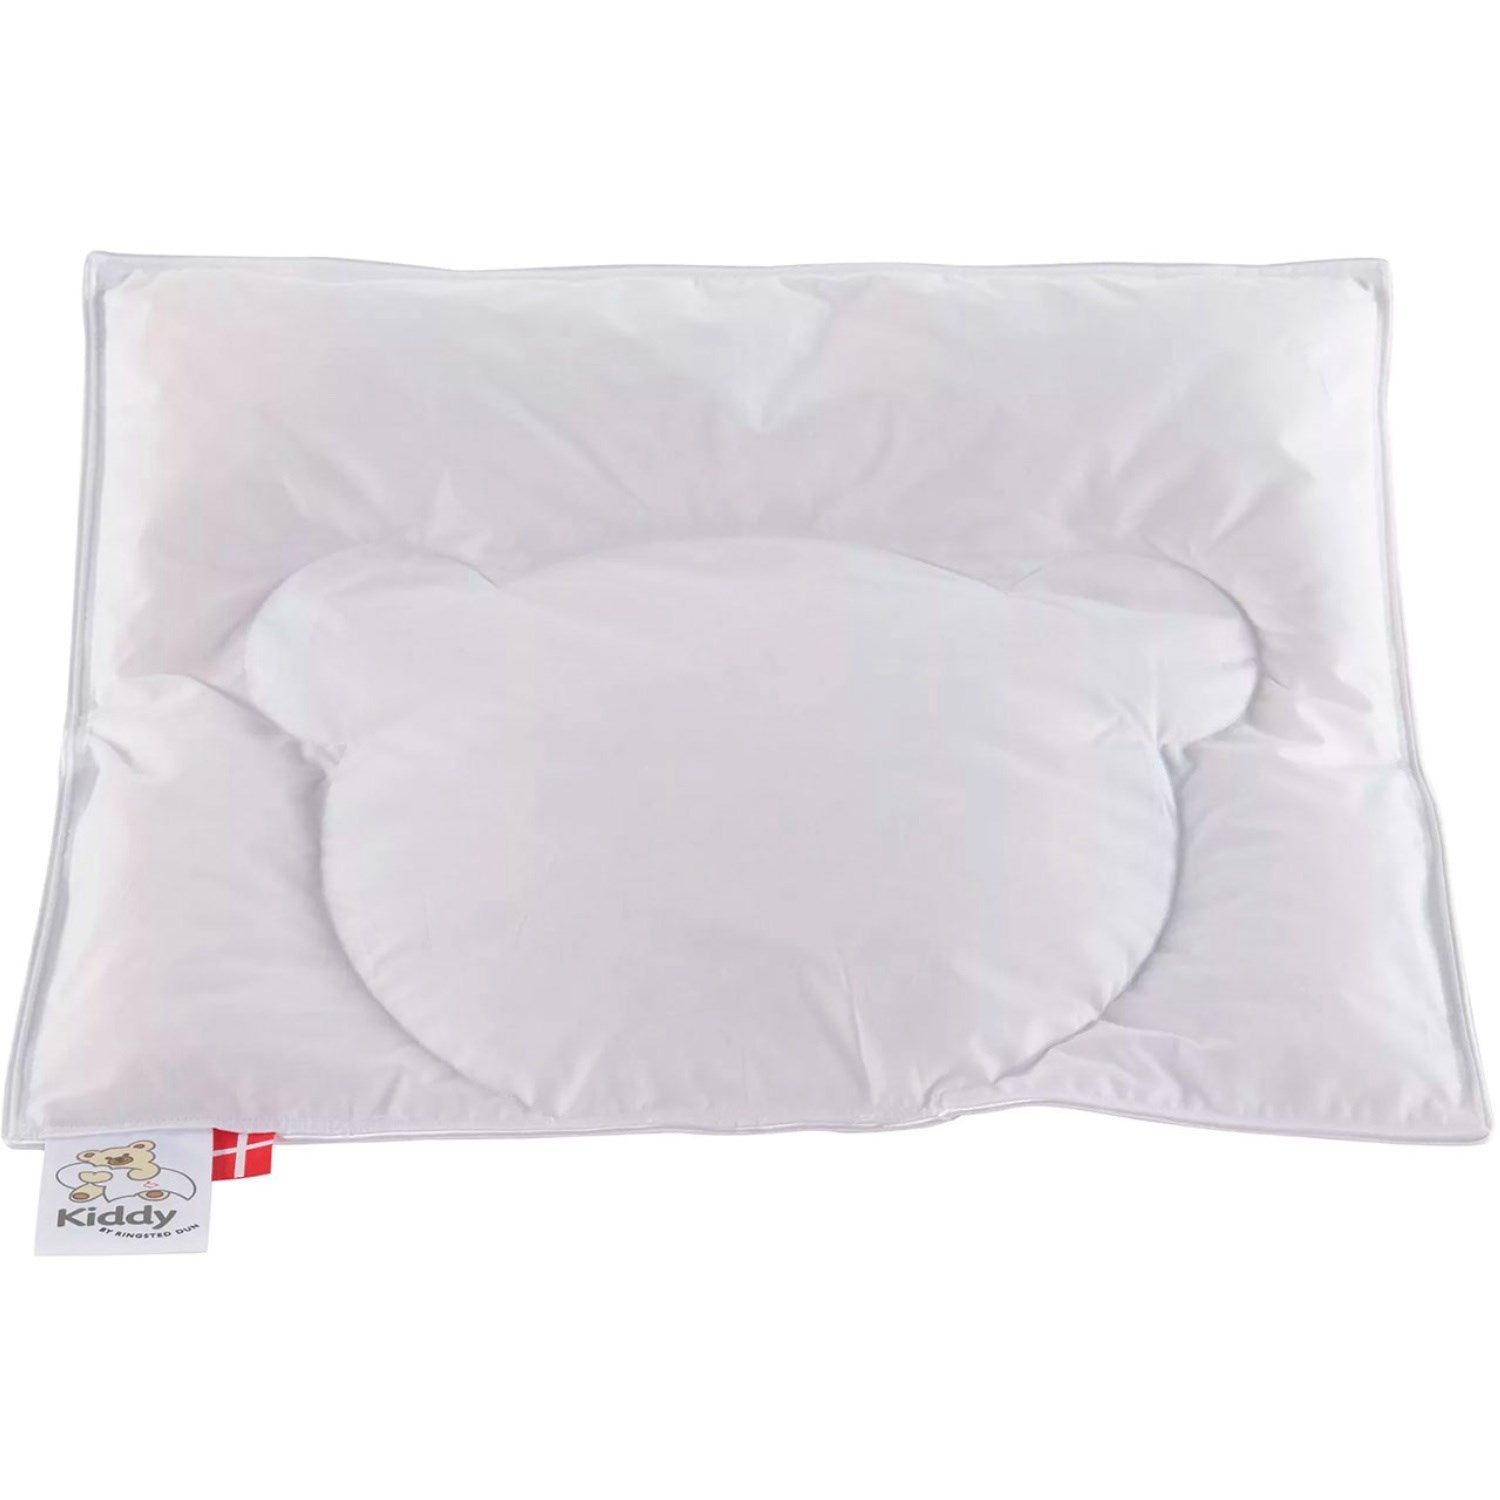 RINGSTED DUN Kiddy Baby Pillow